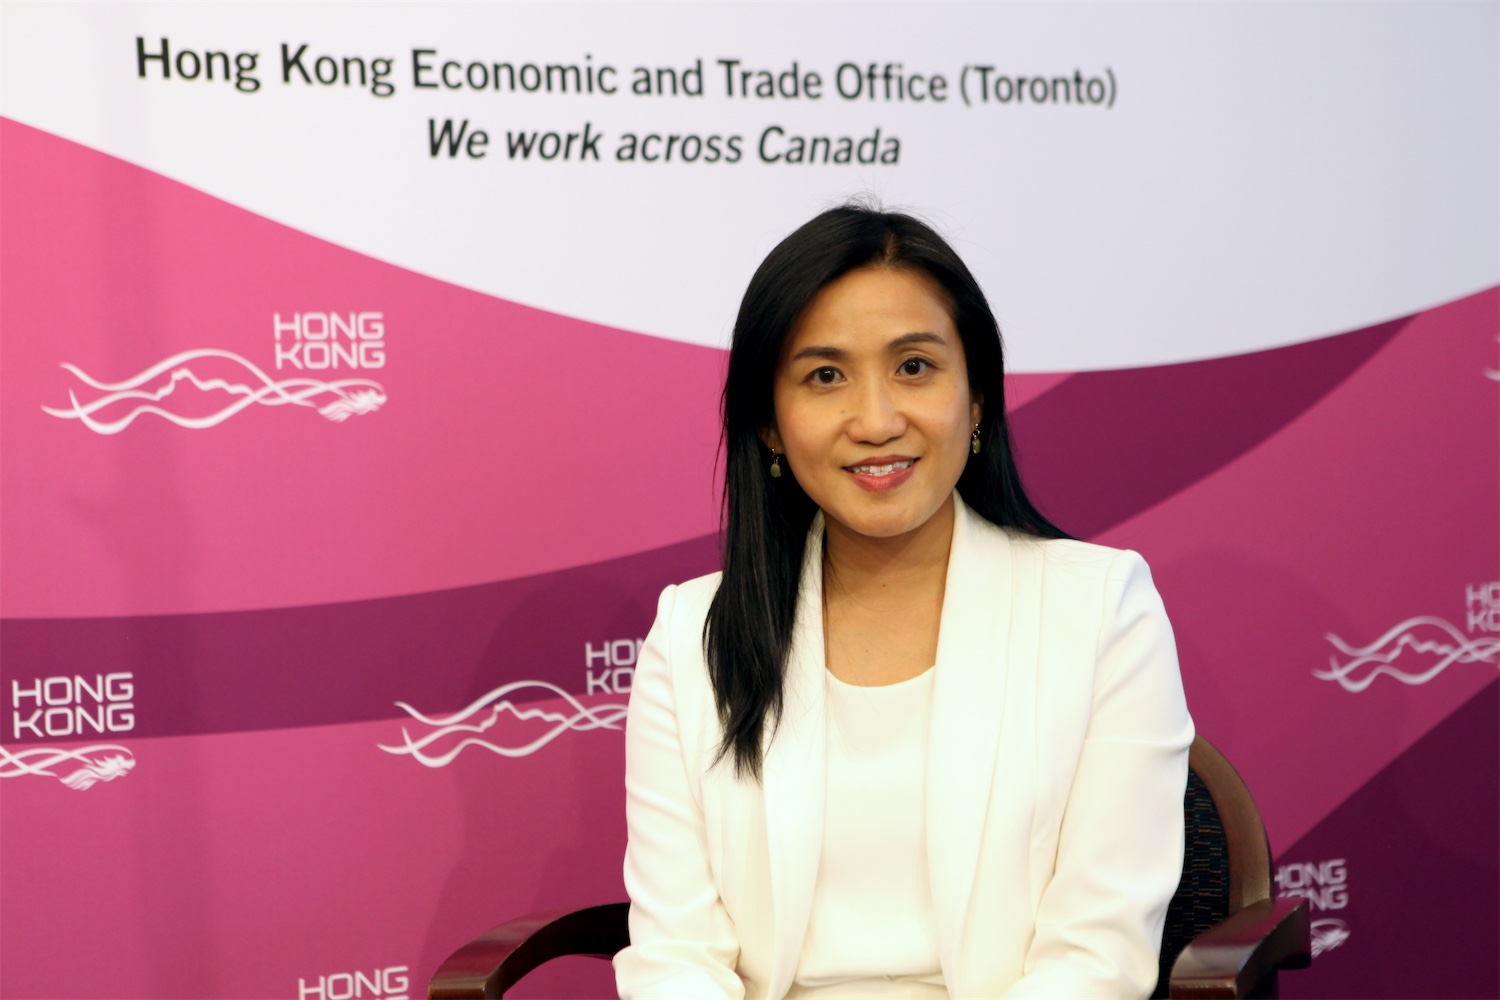 “2nd WIN@HKCBA Virtual Mission to Belt and Road Summit 2022” pre-mission networking meeting hosted virtually by Women's International Network (WIN) of the Hong Kong-Canada Business Association (HKCBA) (Toronto Section) on August 29.